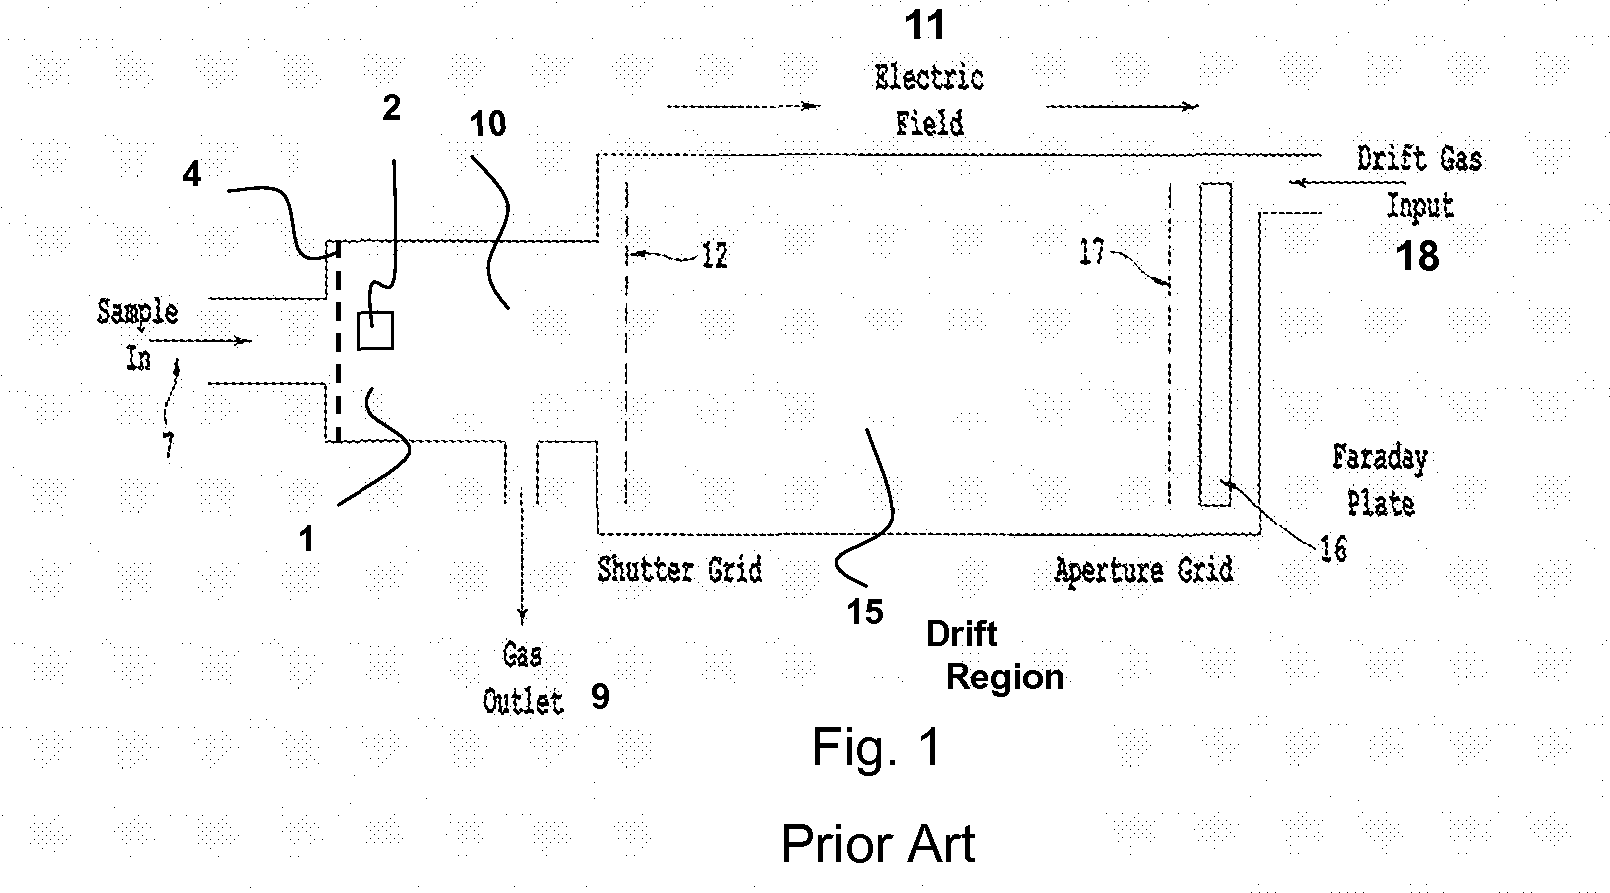 Sensitive ion detection device and method for analysis of compounds as vapors in gases